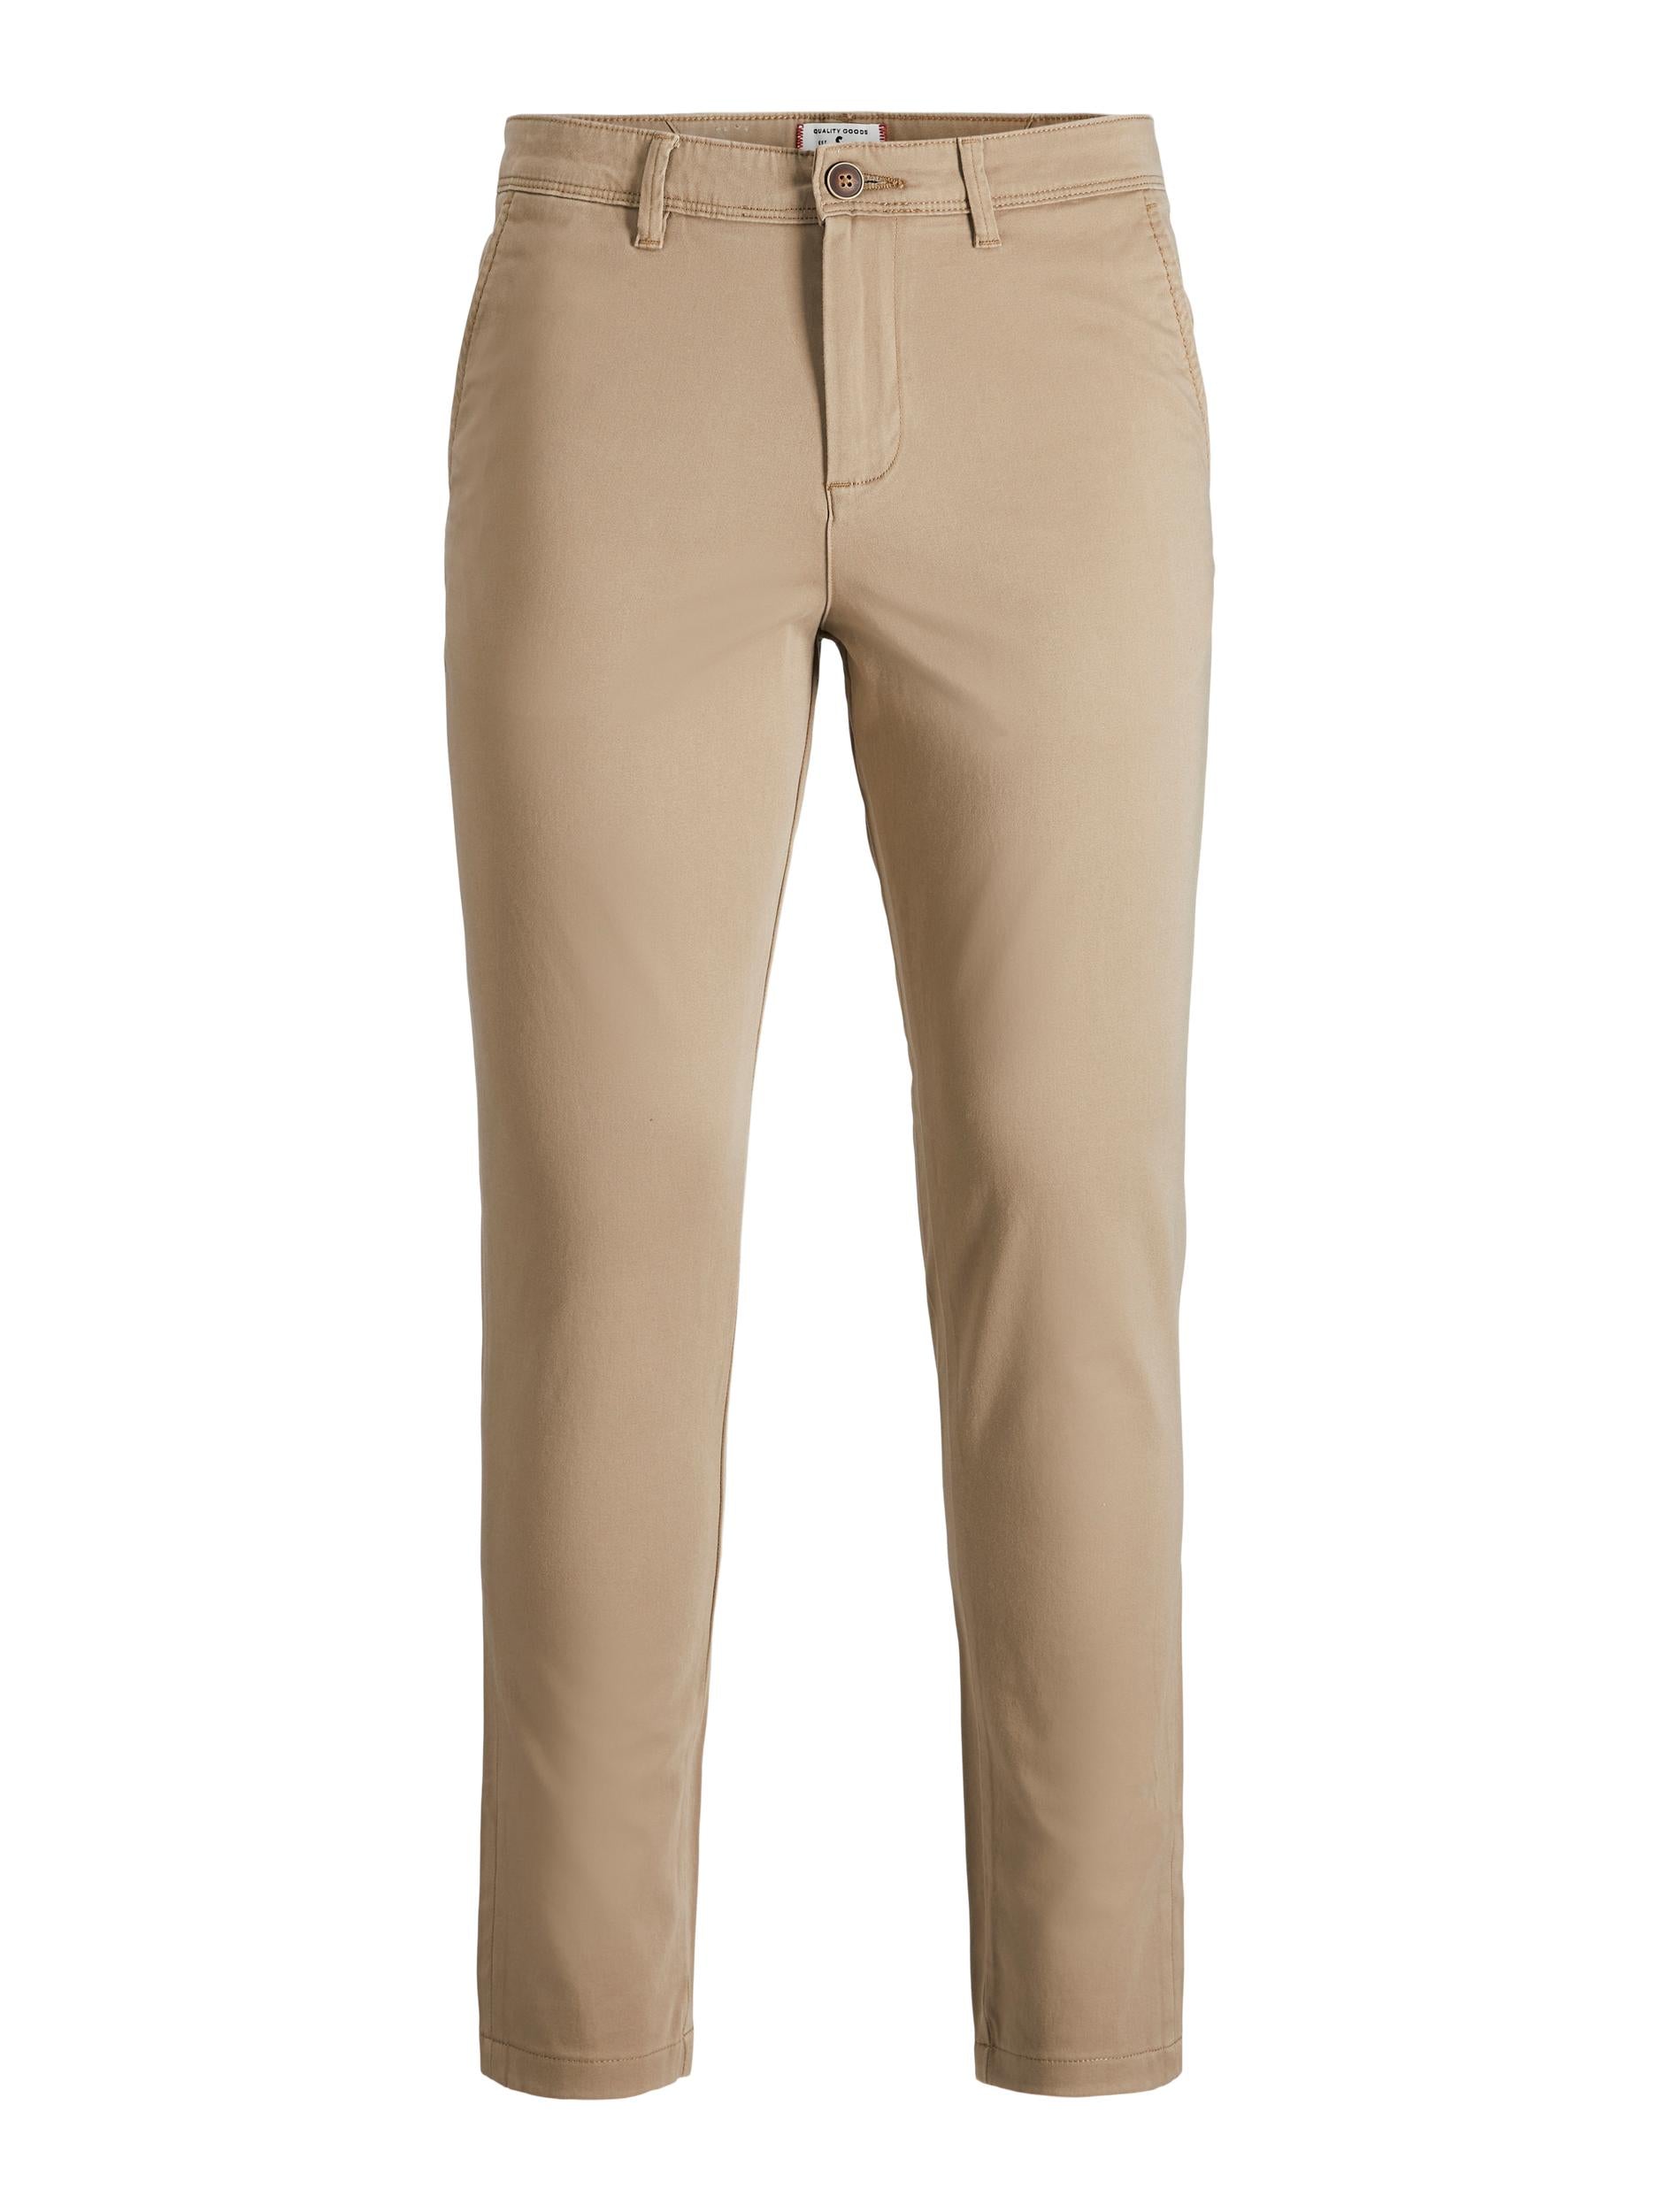 Men's Marco Bowie Mens Beige Chino-Front View